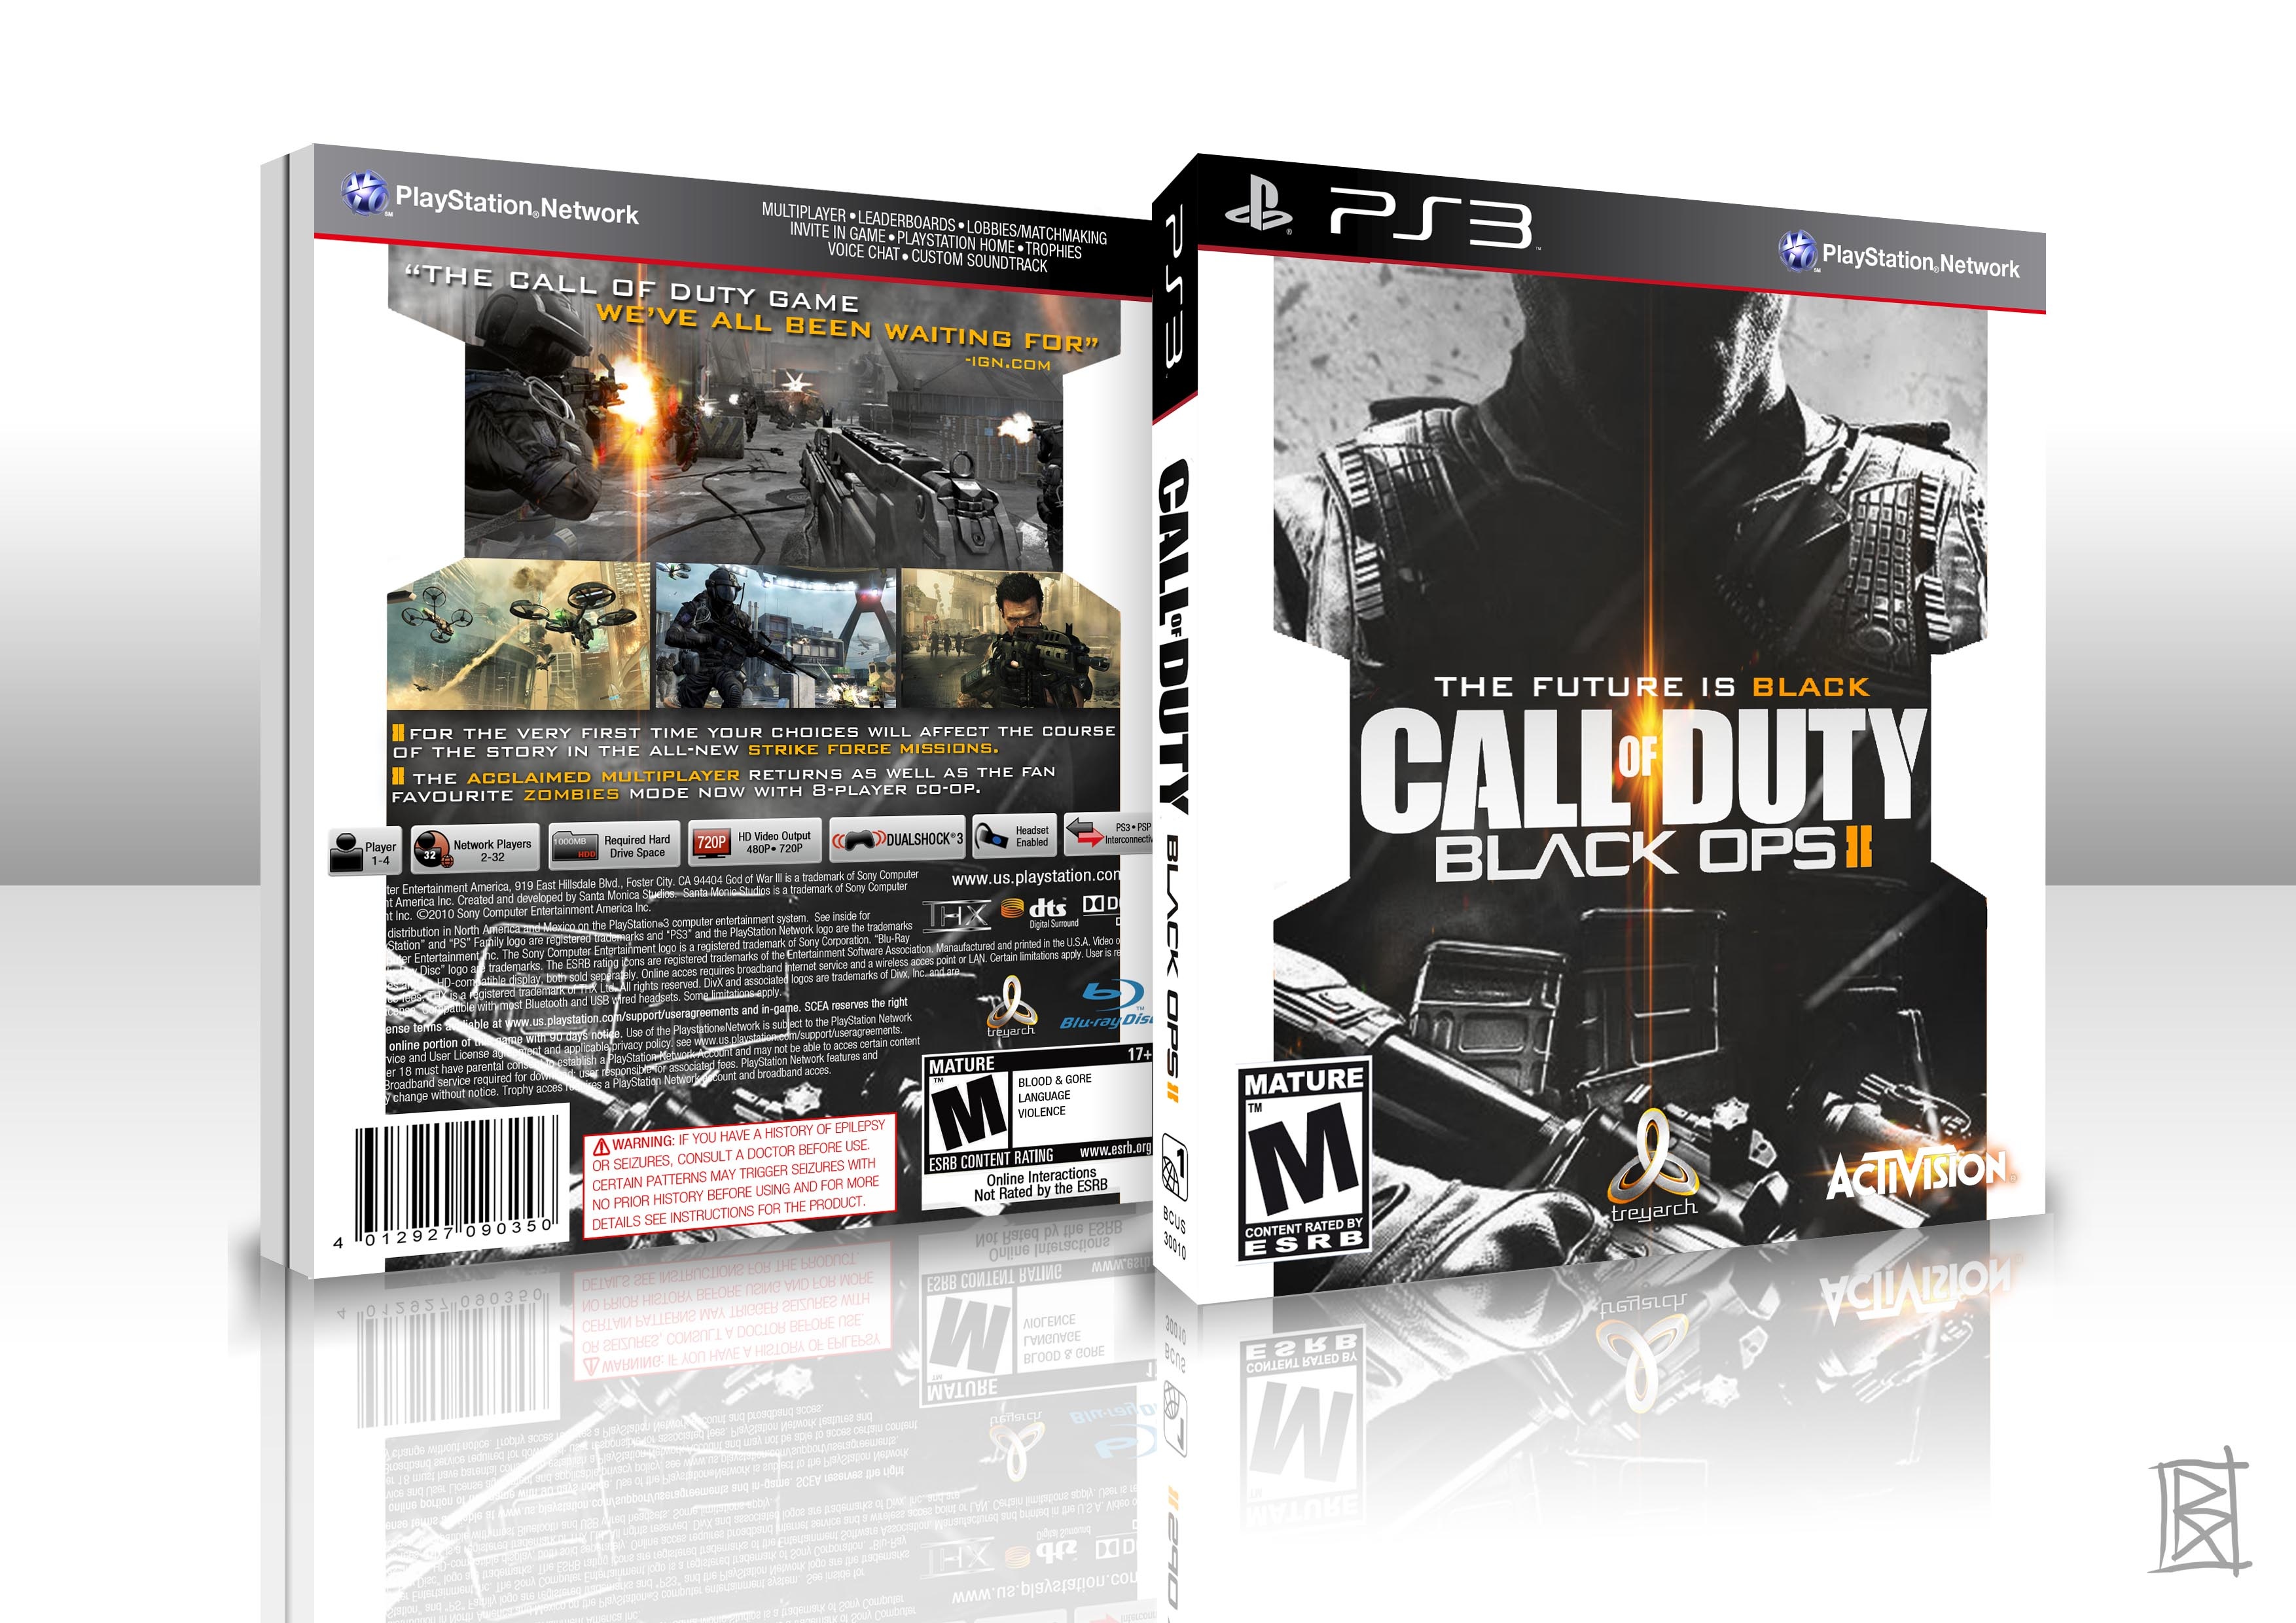 Call of Duty: Black Ops 2 box cover